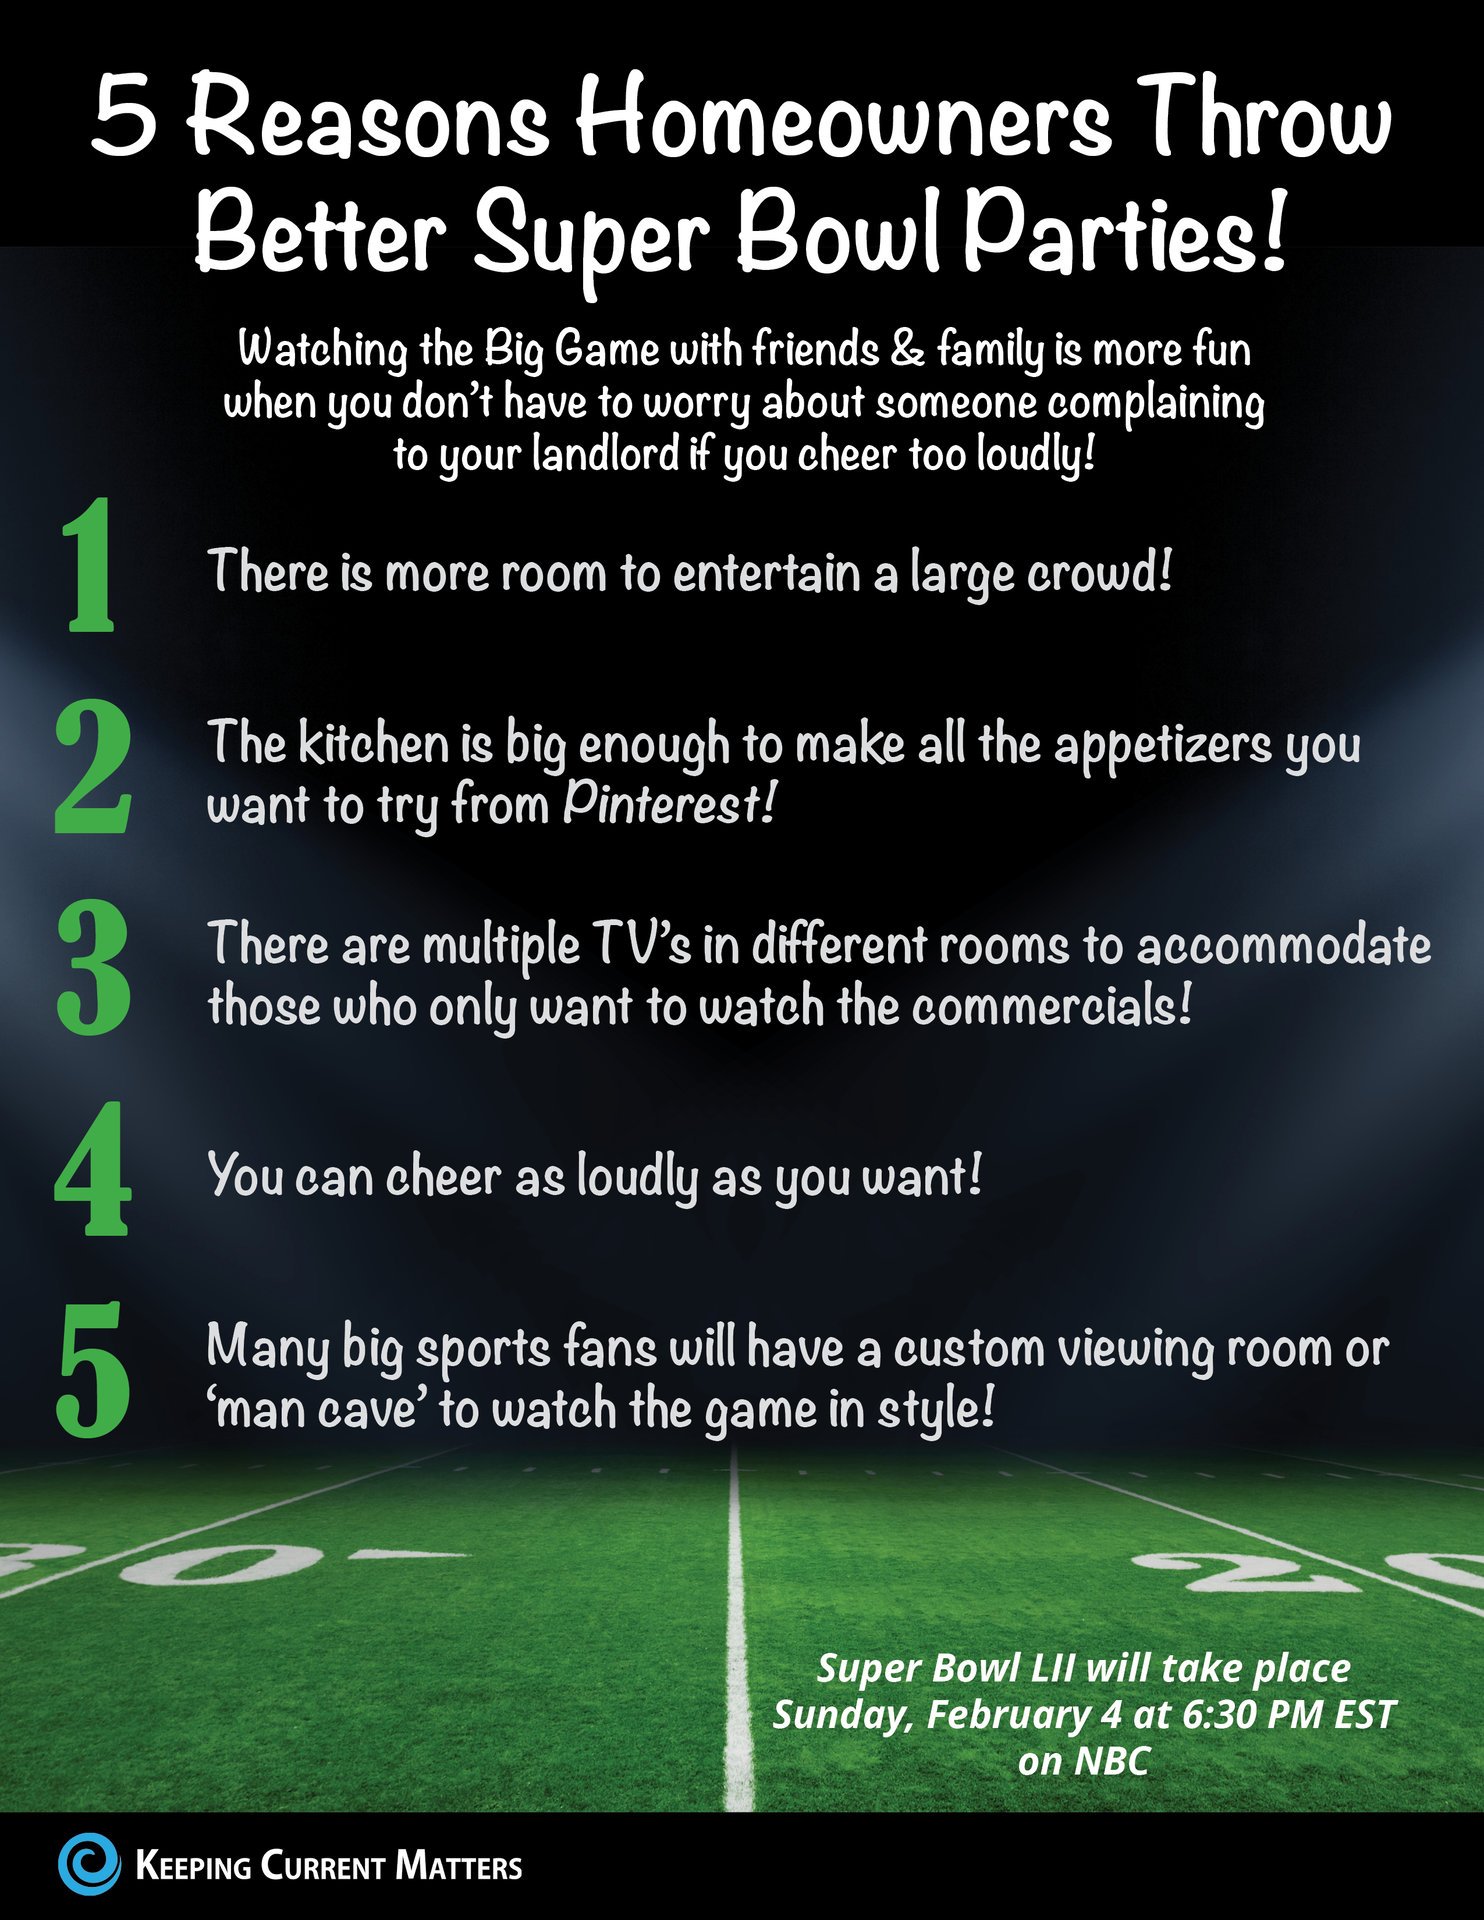 5 Reasons Homeowners Can Throw Better Super Bowl Parties! [INFOGRAPHIC] | Keeping Current Matters